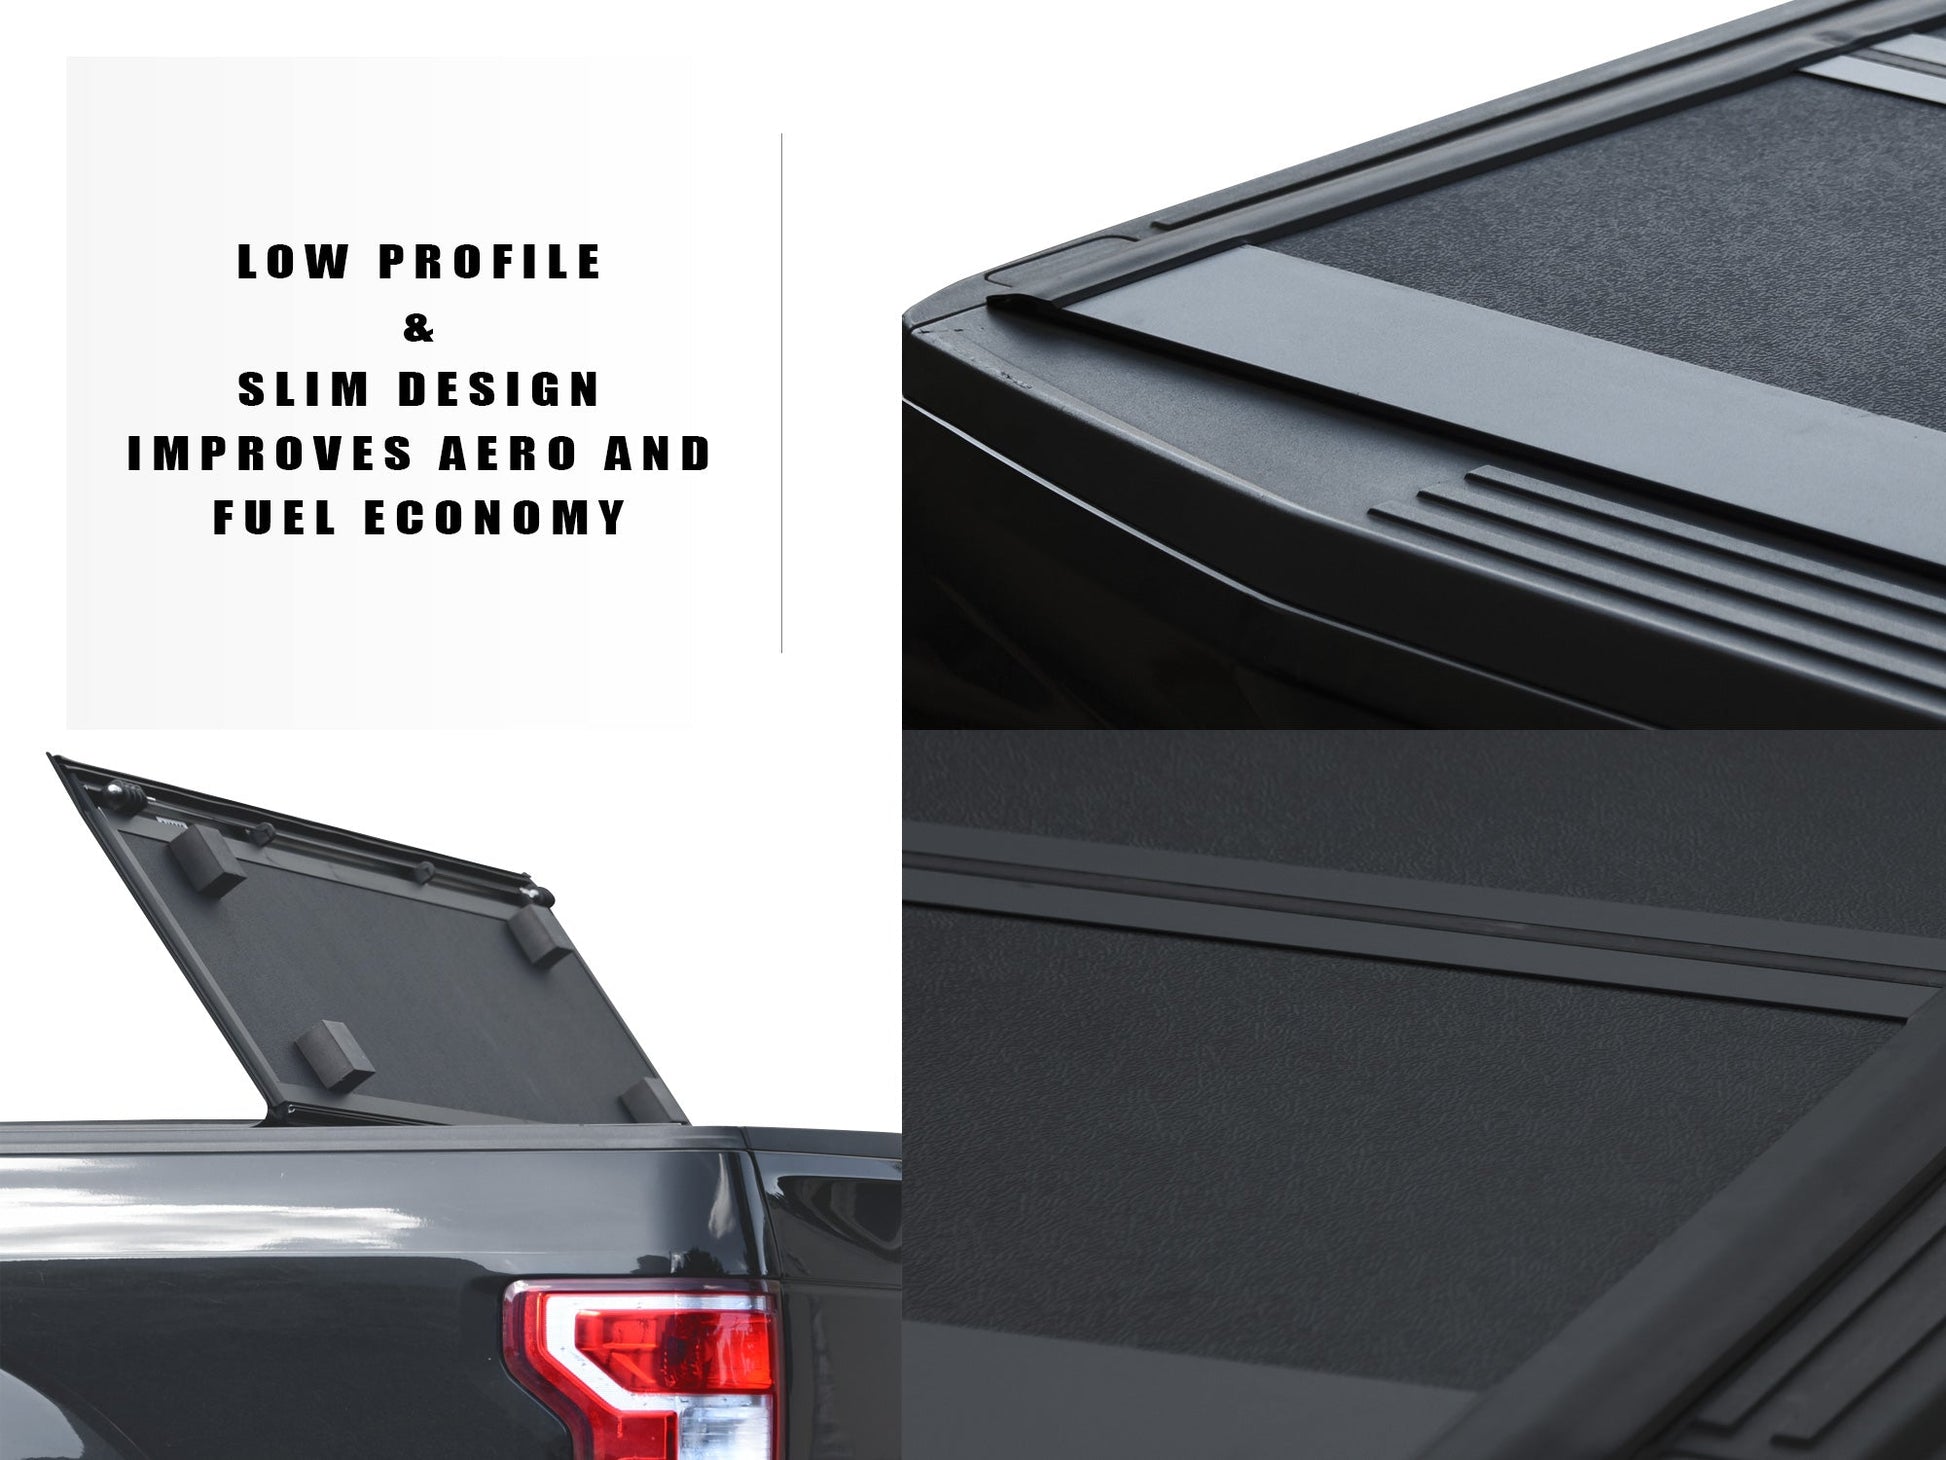 Armordillo  2004-2006 Chevy Silverado / GMC Sierra 1500 (Also Fits 2007 Classic) CoveRex TFX Series Folding Truck Bed Tonneau Cover (5.8 Ft Bed) - Bayson R Motorsports